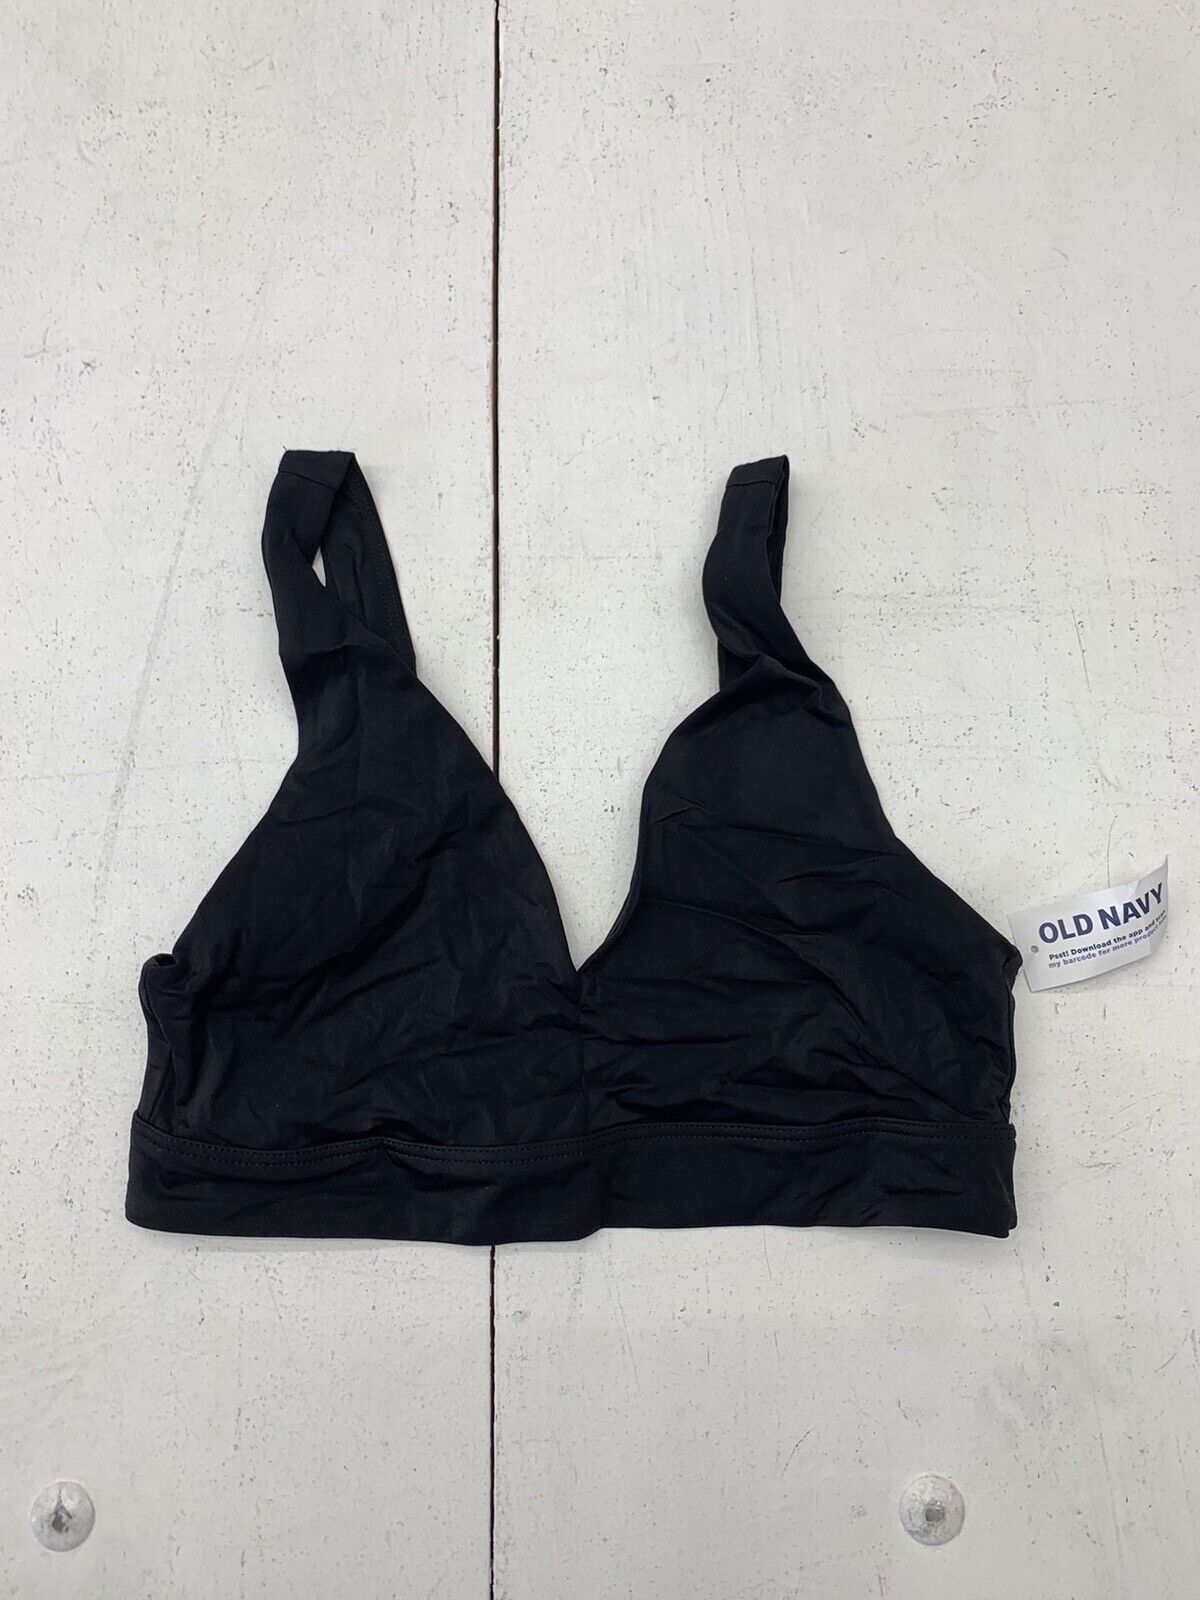 Old Navy Womens Black Bra Size Small - beyond exchange